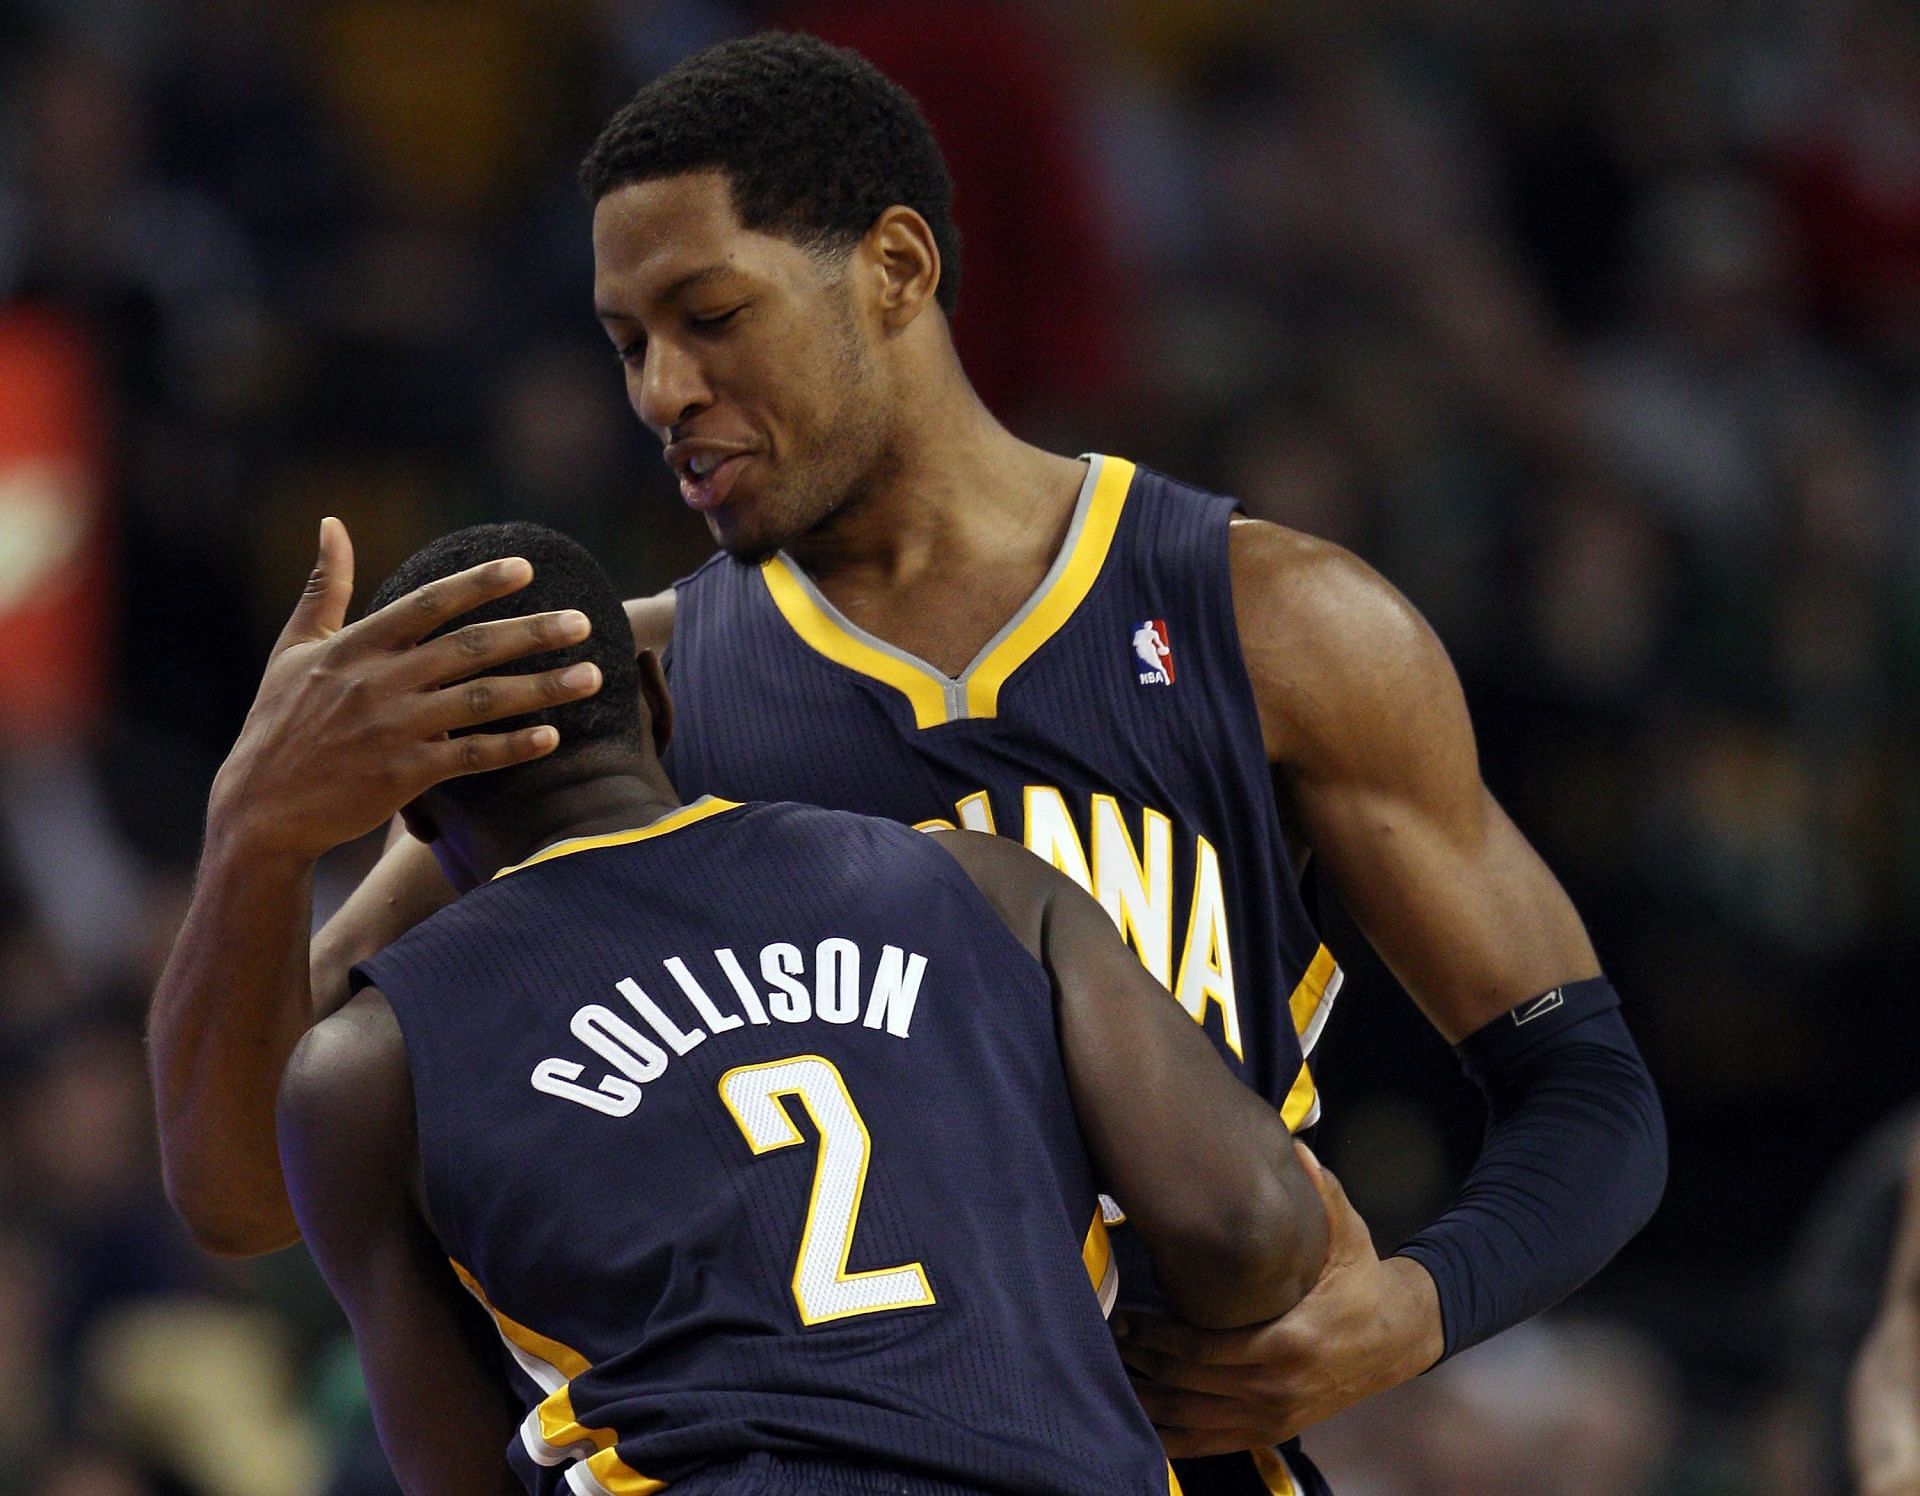 NBA A to Z: How Danny Granger can help Pacers thrive